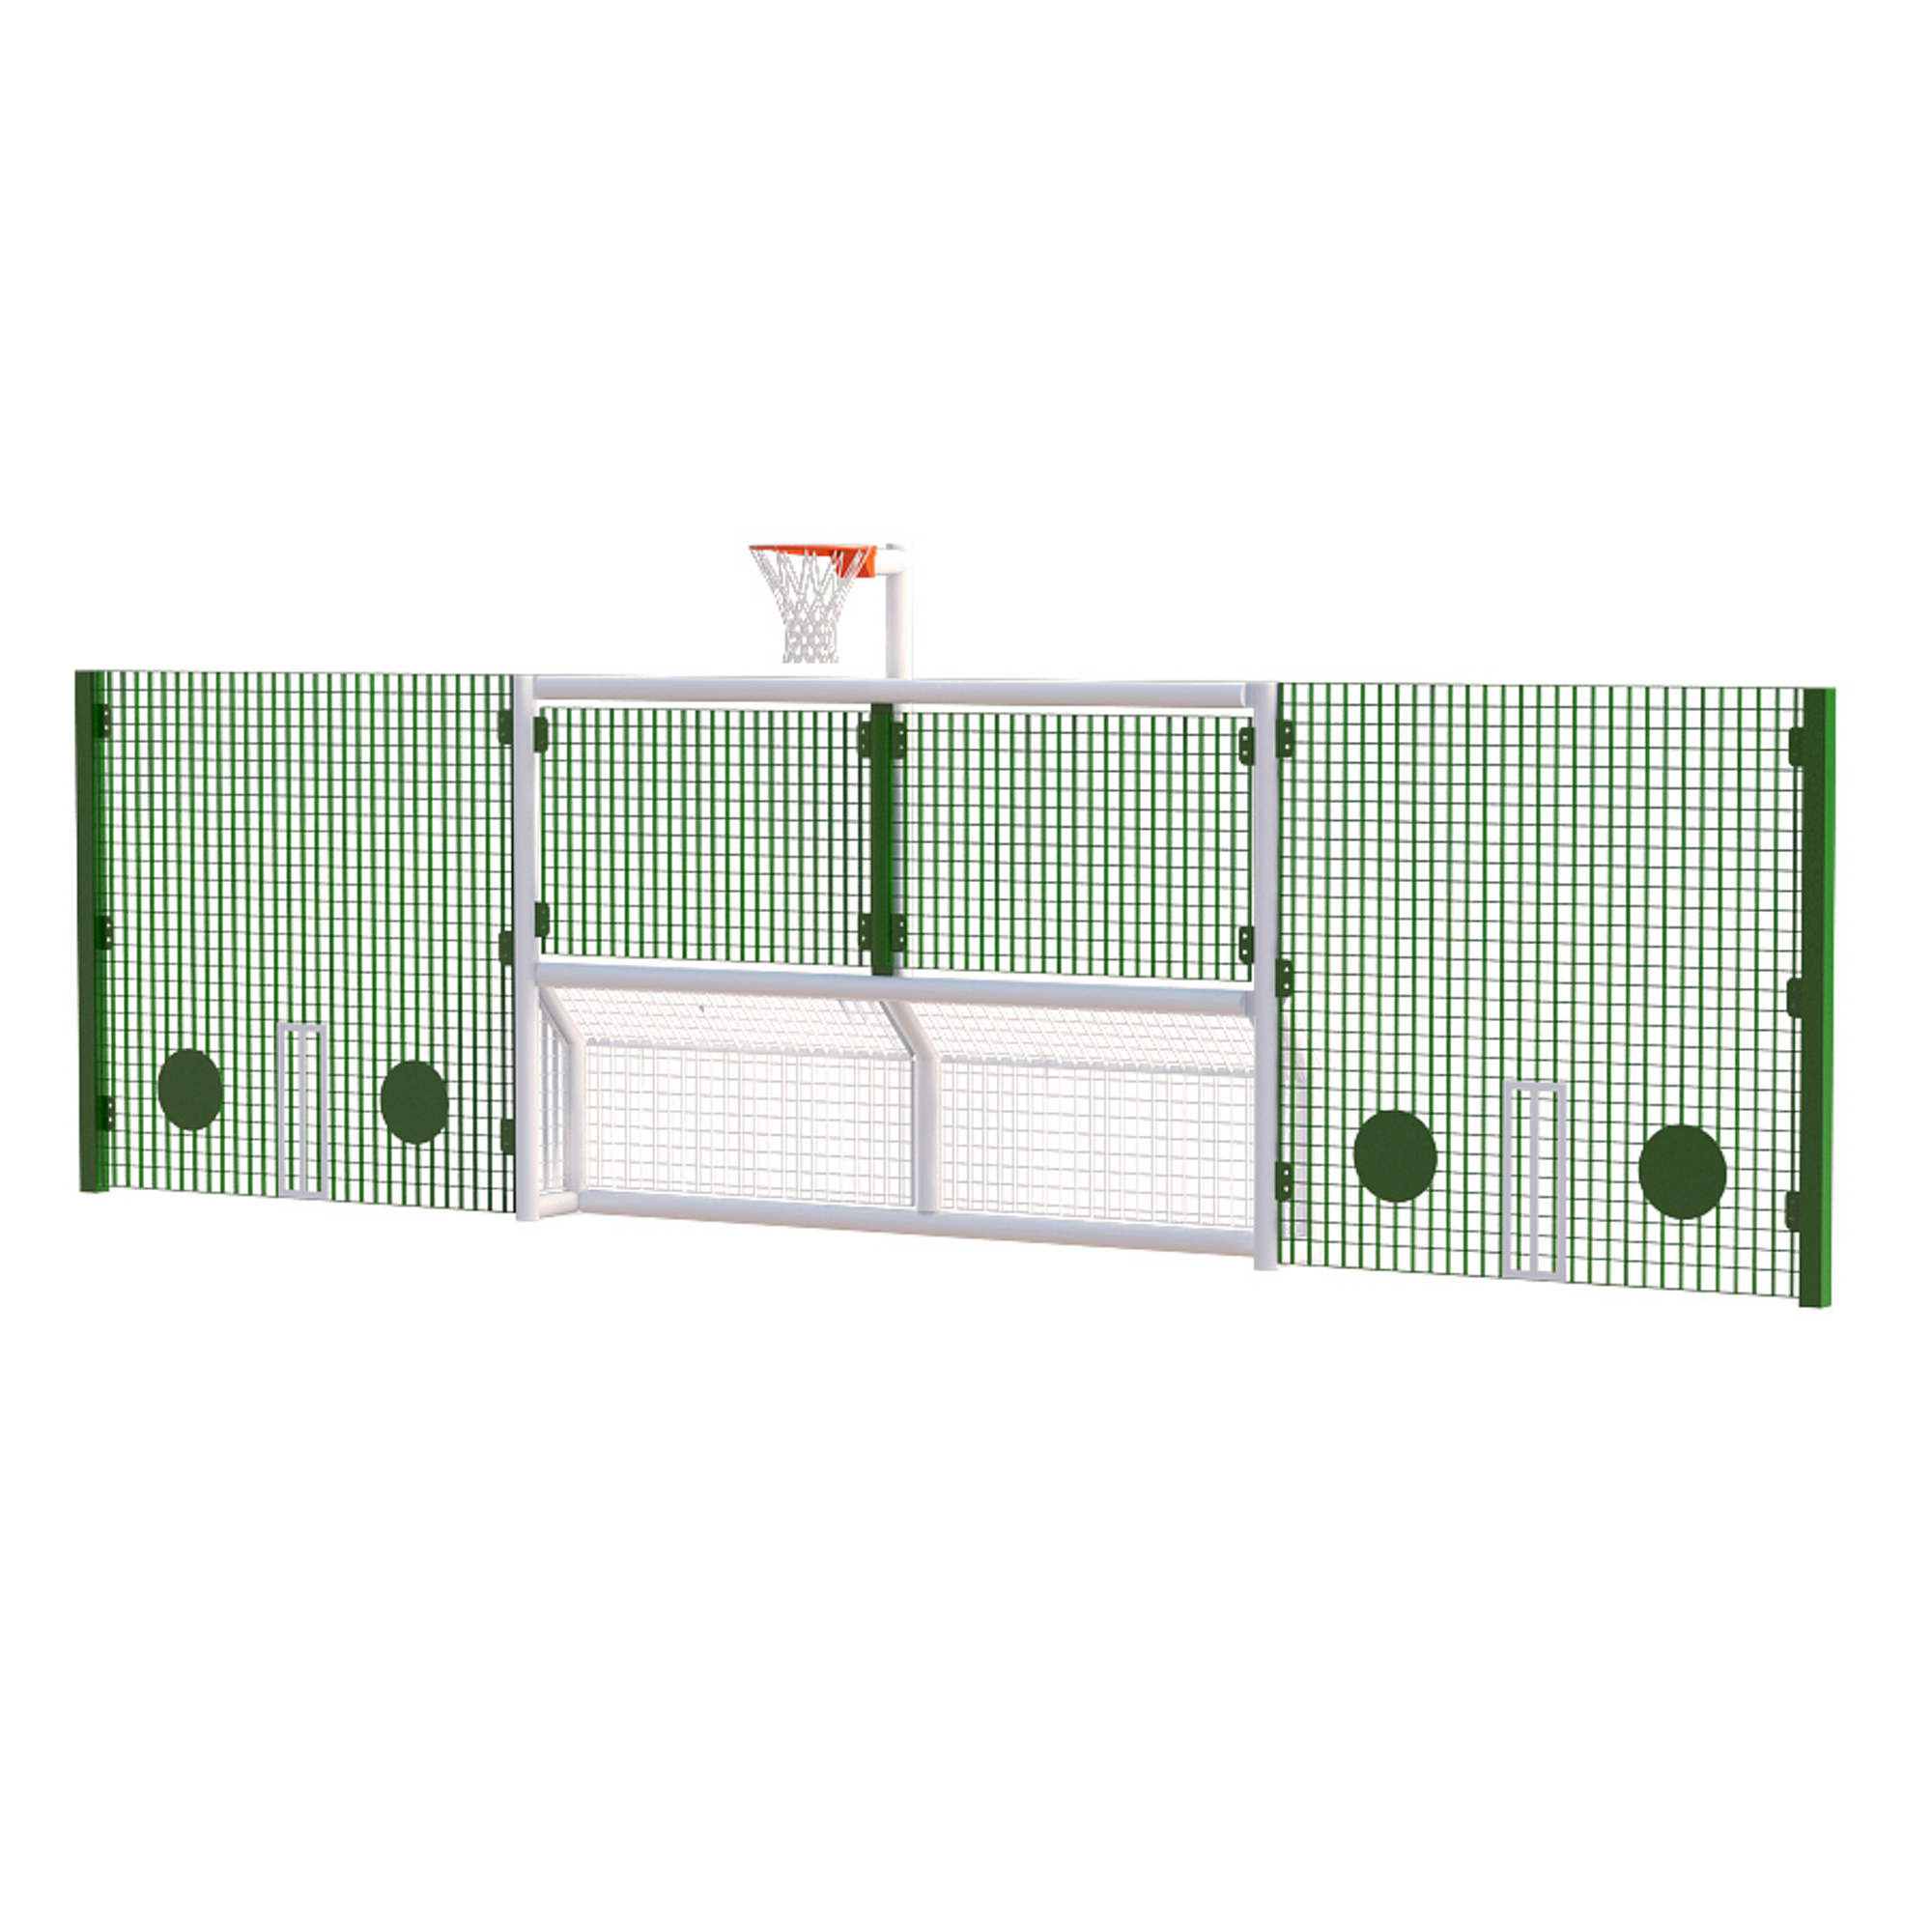 Primary High Nball Bball Wht Frame Green